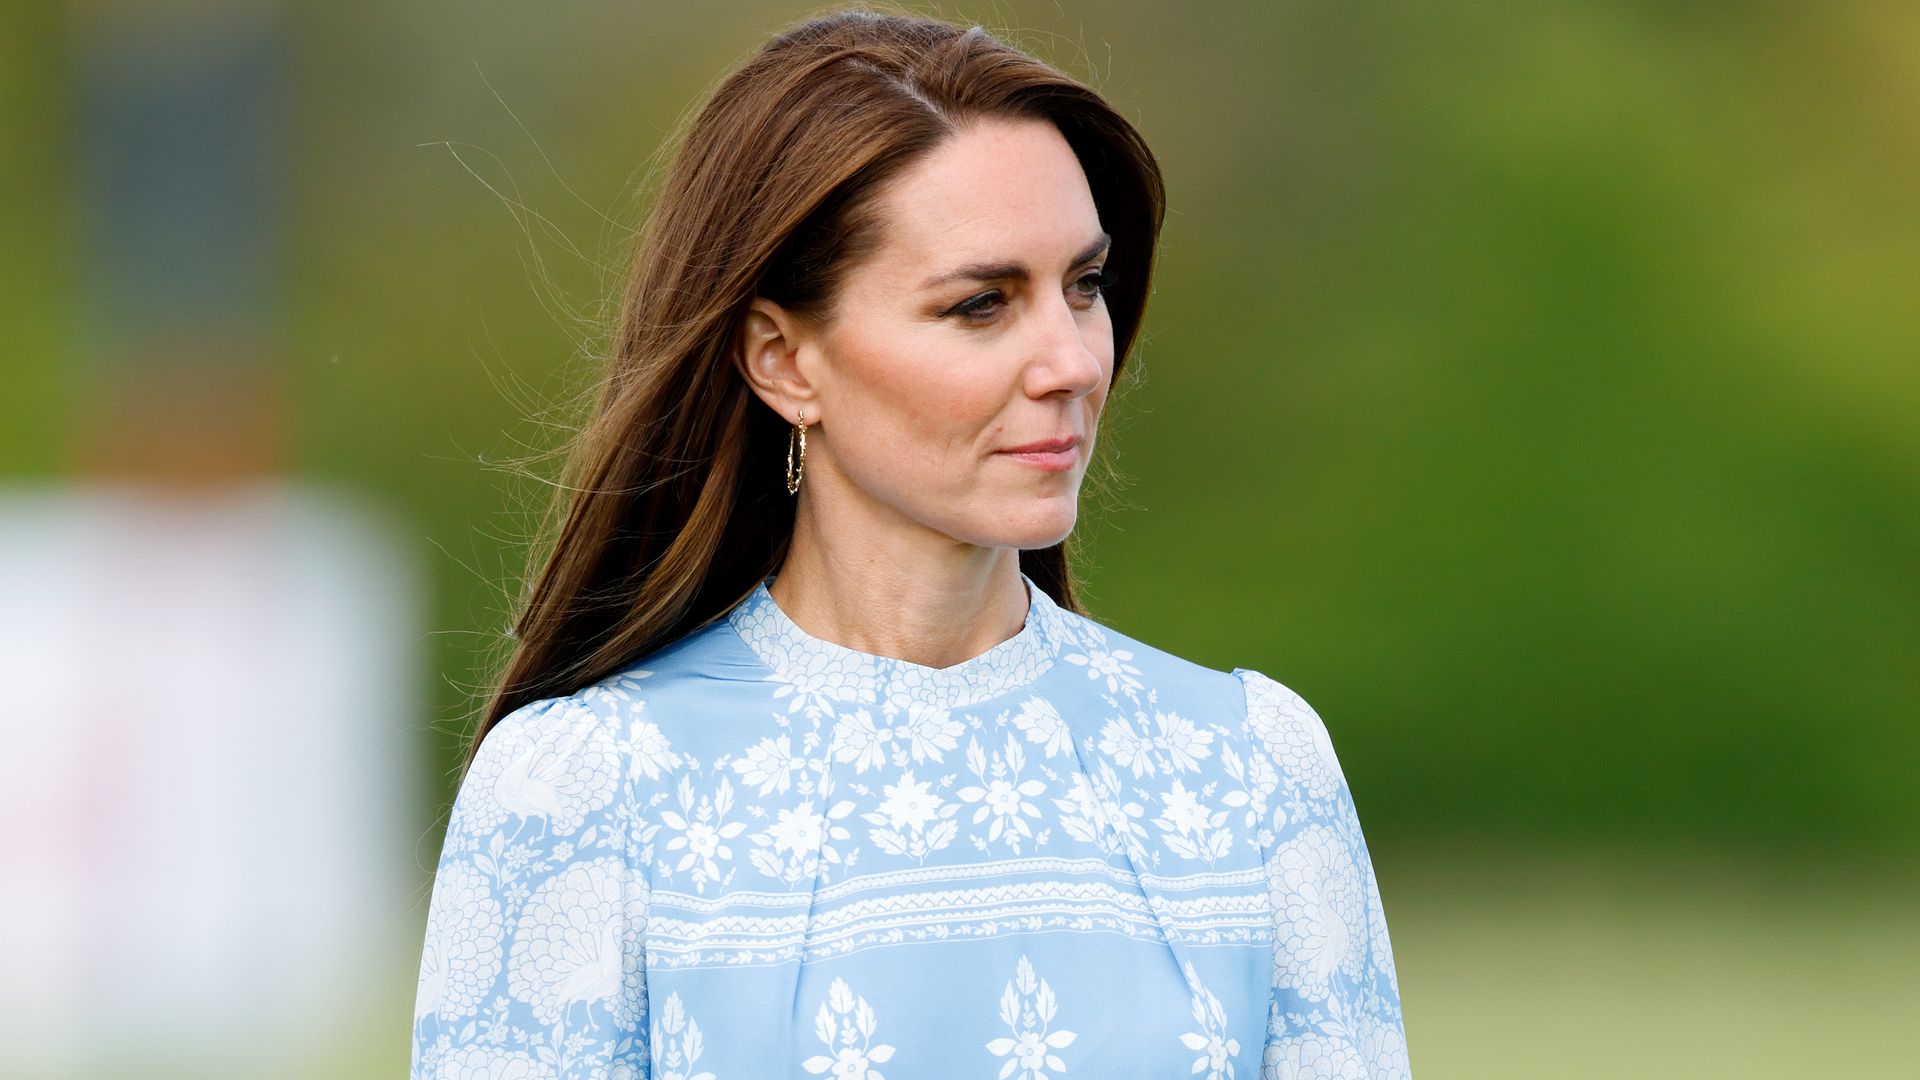 Kate Middleton wearing blue dress at the polo